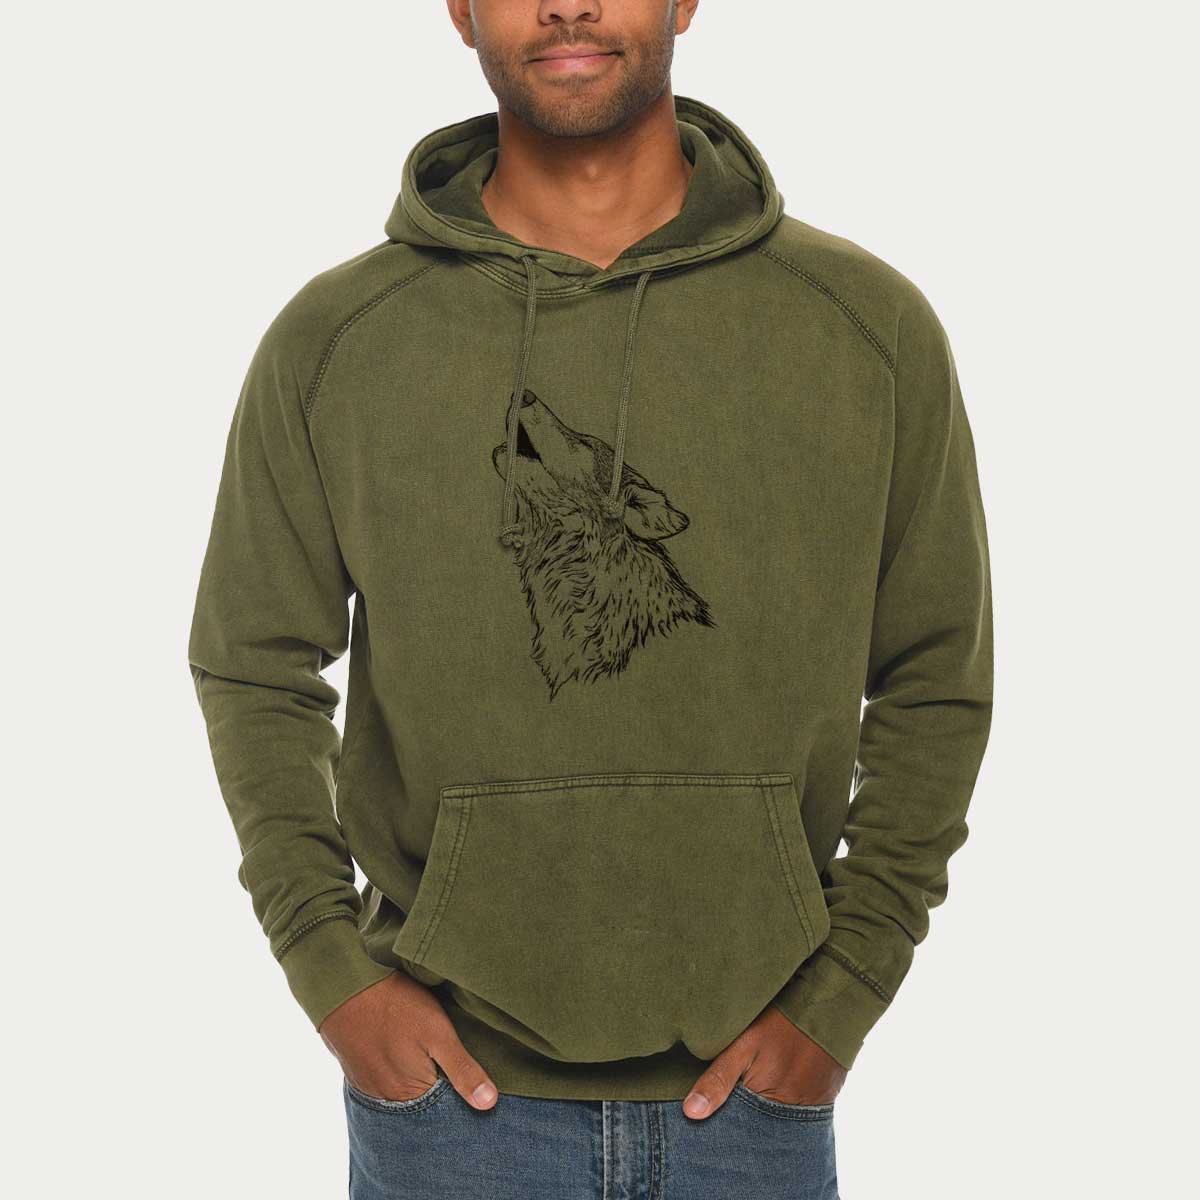 Canis lupus - Grey Wolf Howling  - Mid-Weight Unisex Vintage 100% Cotton Hoodie